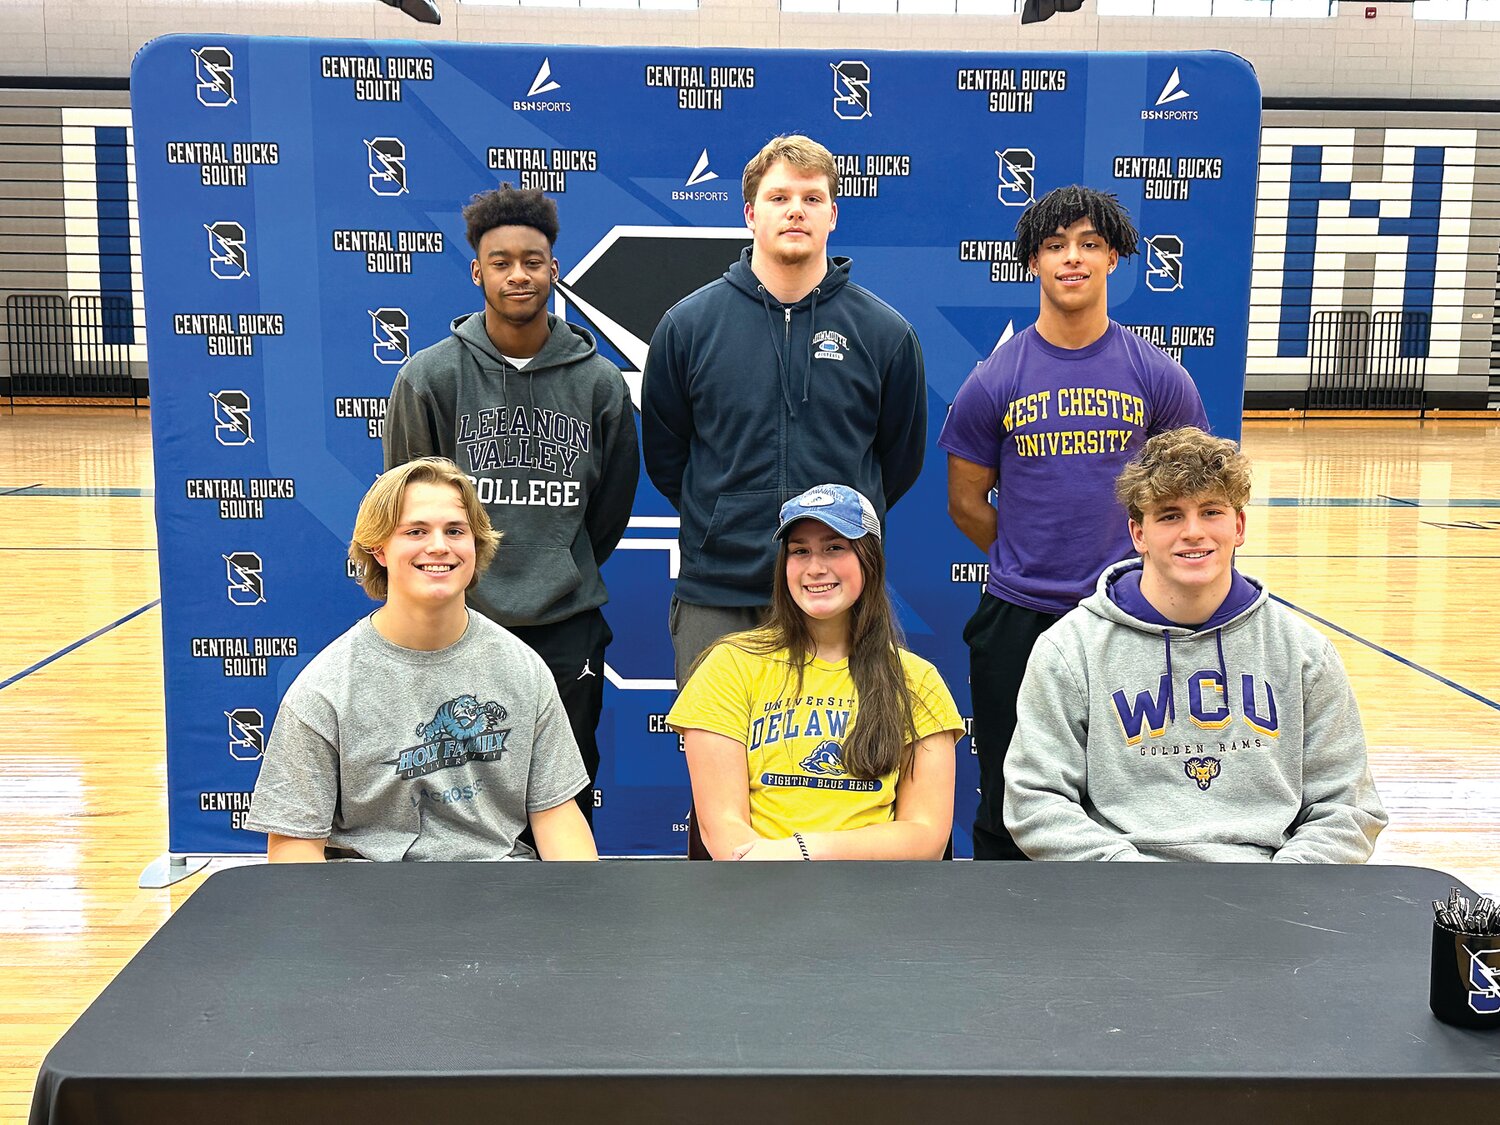 Central Bucks South recently honored six seniors for their commitment to compete in collegiate sports. From left are: front row, John Henson, Rosie Marraccini, Sean Moskowitz; back row, Corey Moore, Collin Goetter and Anthony Leonardi.